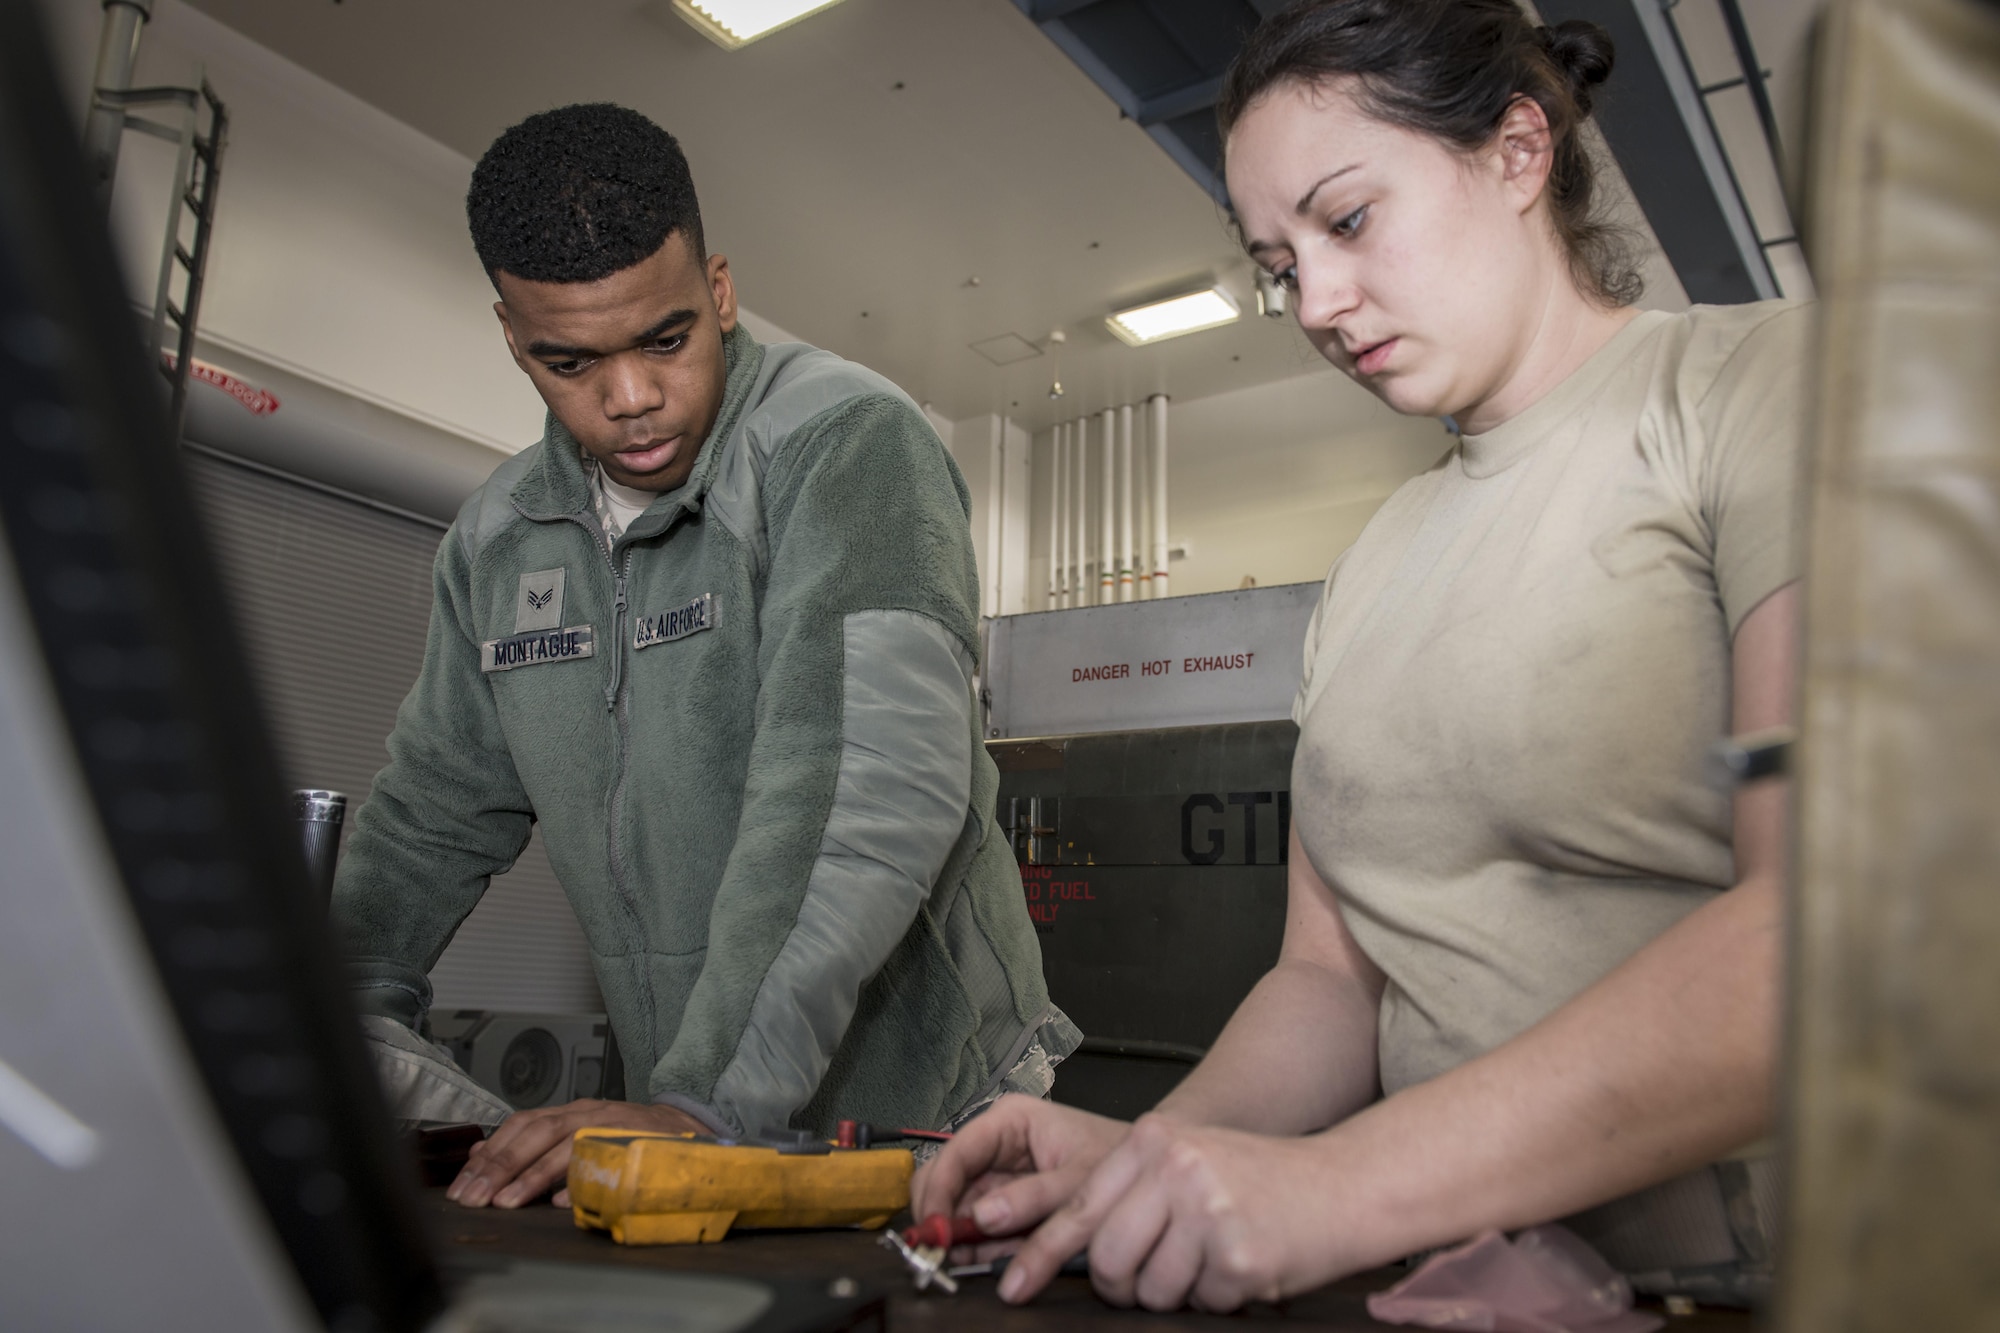 U.S. Air Force Senior Airman Shaquille Montague, left, a firefighter with the 35th Civil Engineer Squadron, watches as Senior Airman Kelci Vo, an aerospace ground equipment journeyman with the 35th Maintenance Squadron, charges a diode for a M32A-60A gas turbine generator during Misawa’s first-ever career field exchange and shadow program at Misawa Air Base, Japan, Jan. 26, 2017. The generator is a 35th MXS AGE flight asset used to troubleshoot F-16 Fighting Falcons prior to takeoff. Montague joined five other Airmen who took part in Misawa’s first-ever career field exchange and shadow program. The initiative affords service members of all ranks from across the installation an opportunity to live a day in another’s boots. (U.S. Air Force photo by Staff Sgt. Benjamin W. Stratton)